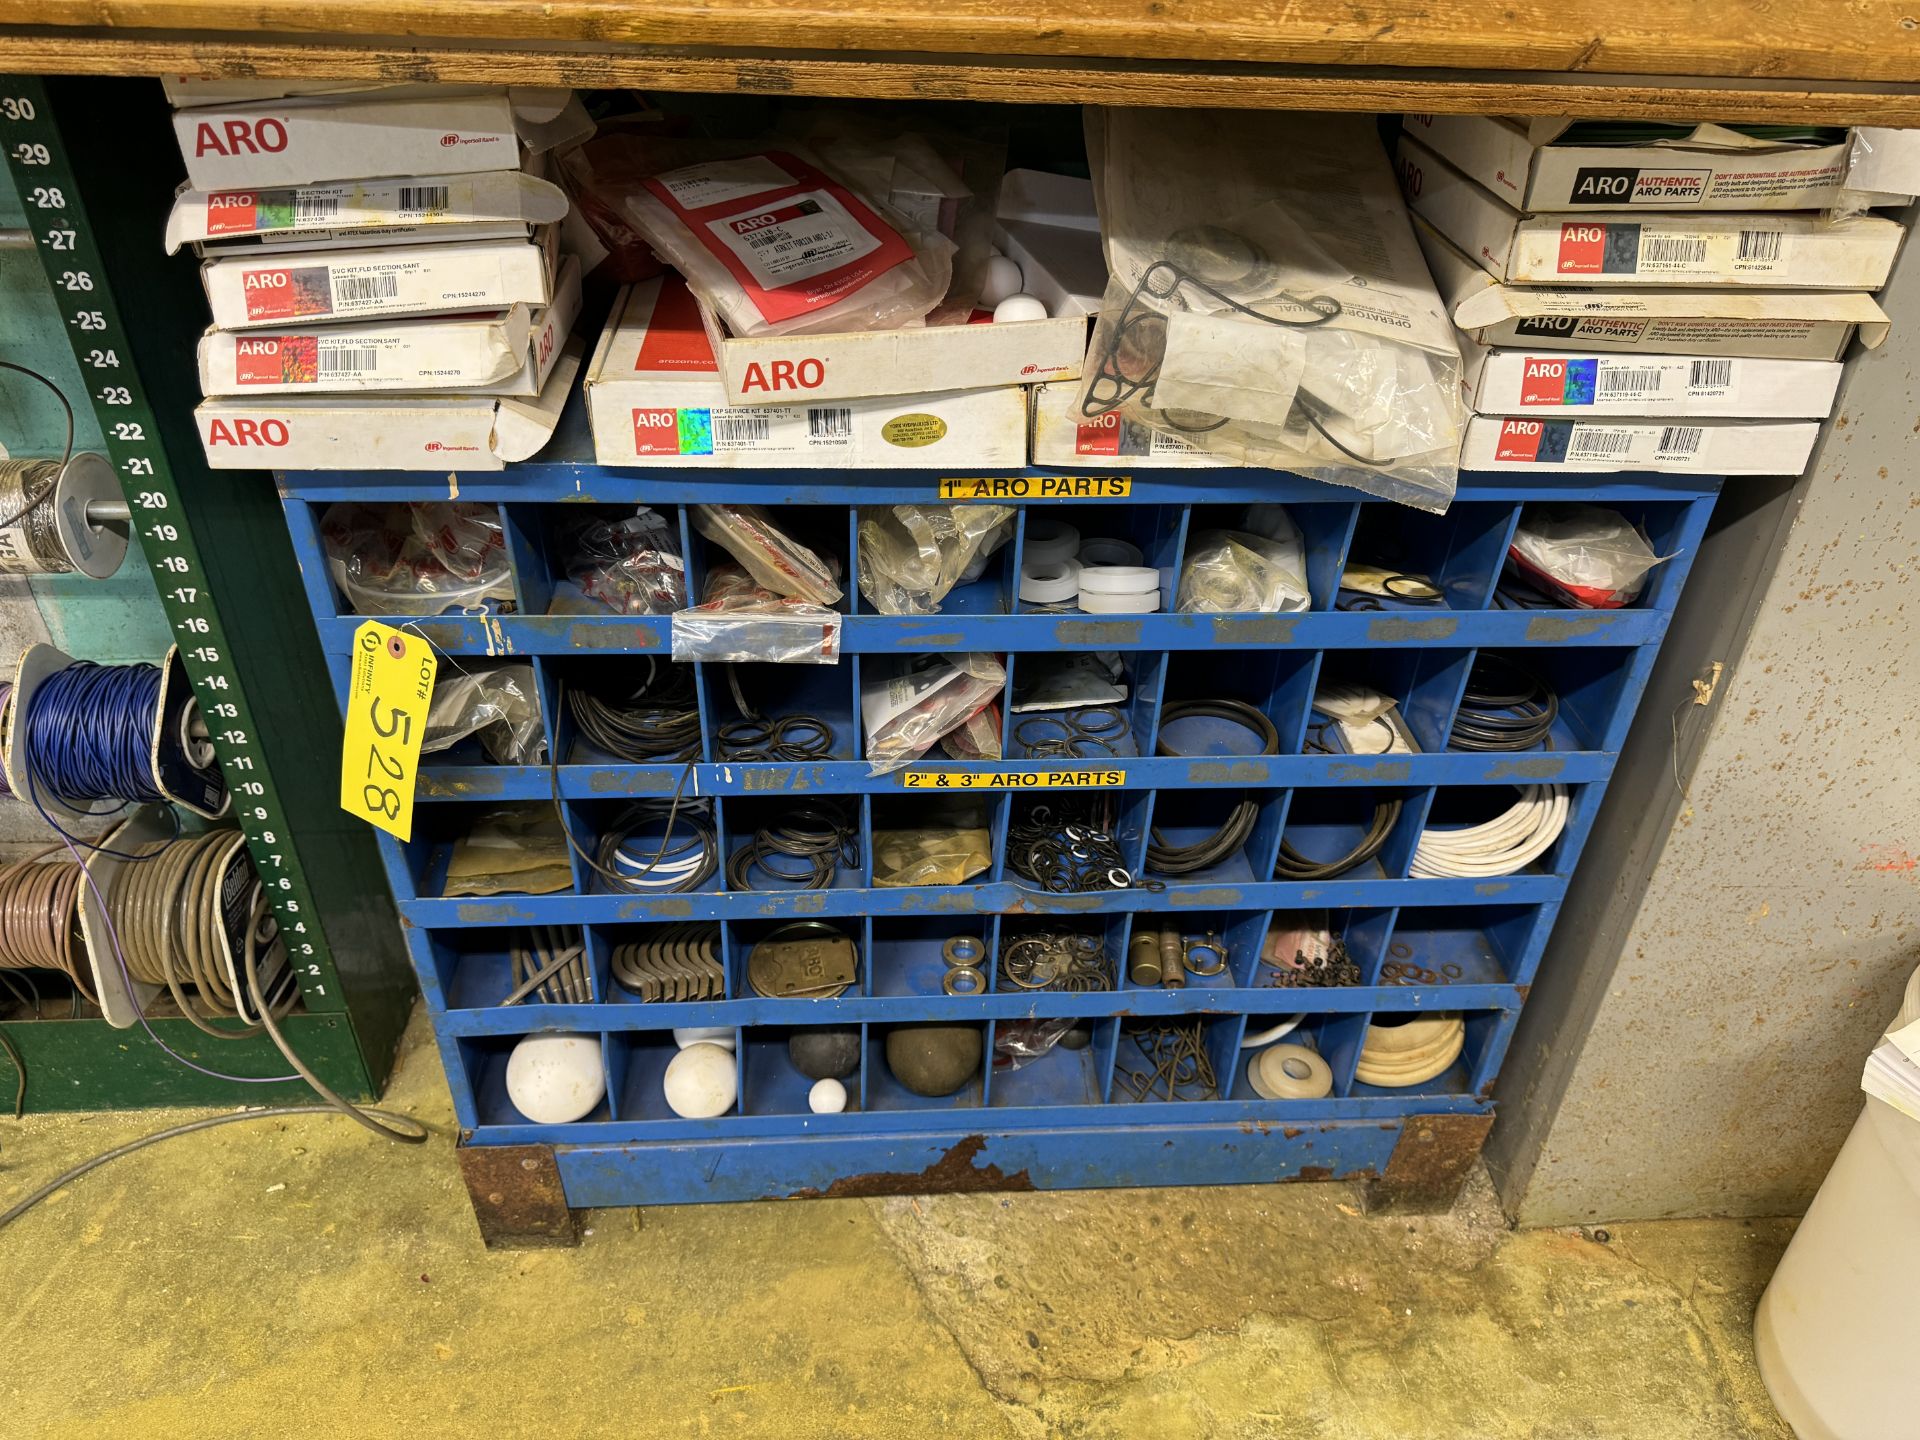 WIRE SPOOL RACK, PIGEON HOLE CABINET W/ ARO KITS, GASKETS, SHELVING UNITS W/ SANDING BELTS, SAFETY